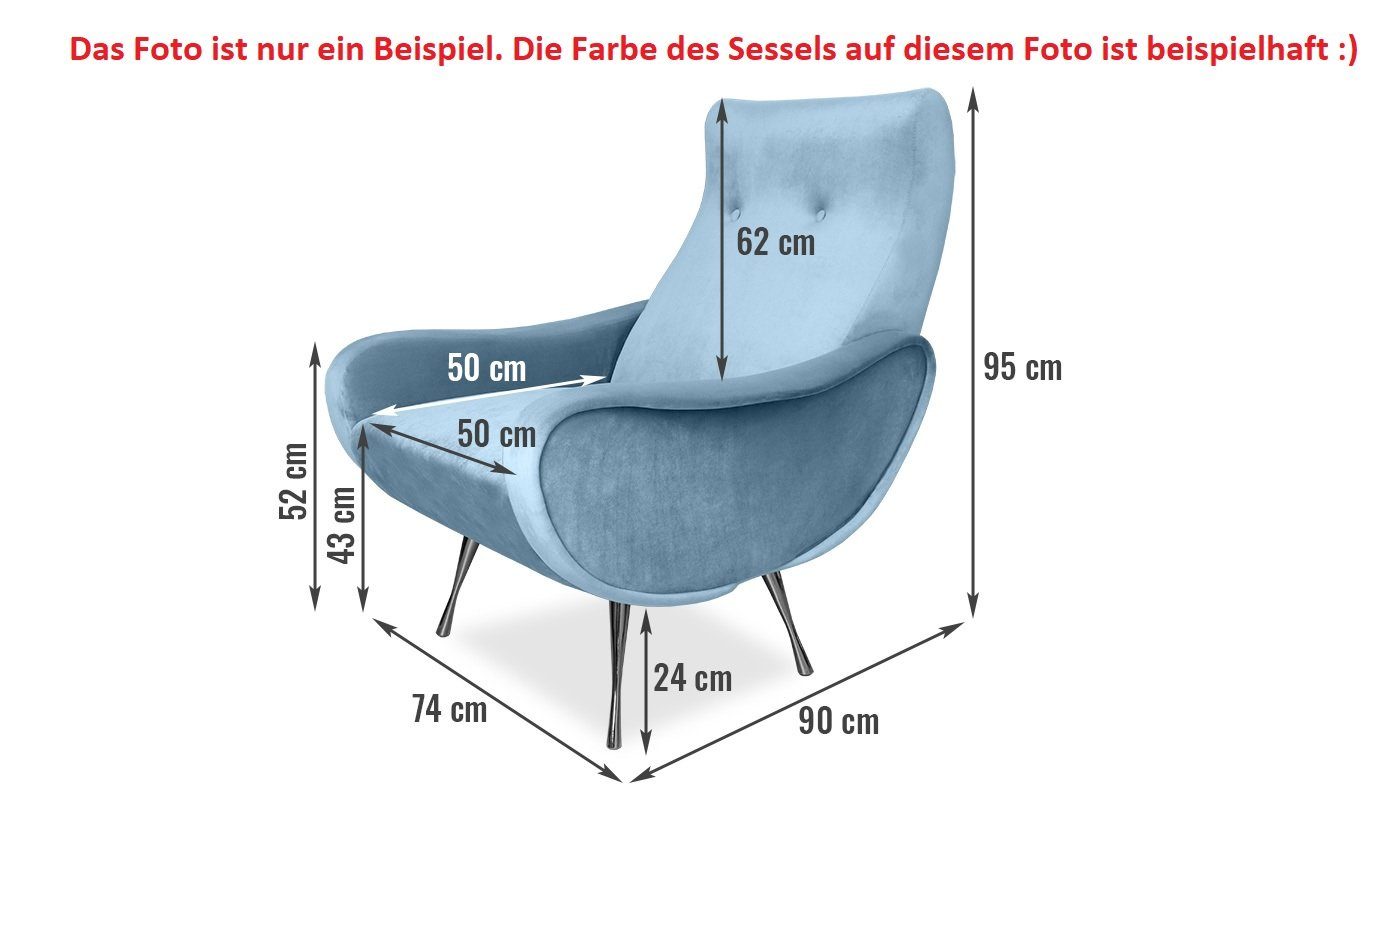 Couchsessel, Sessel, Lesesessel Relaxsessel, pressiode Fernsehsessel, Türkis ROYAL TV-Sessel